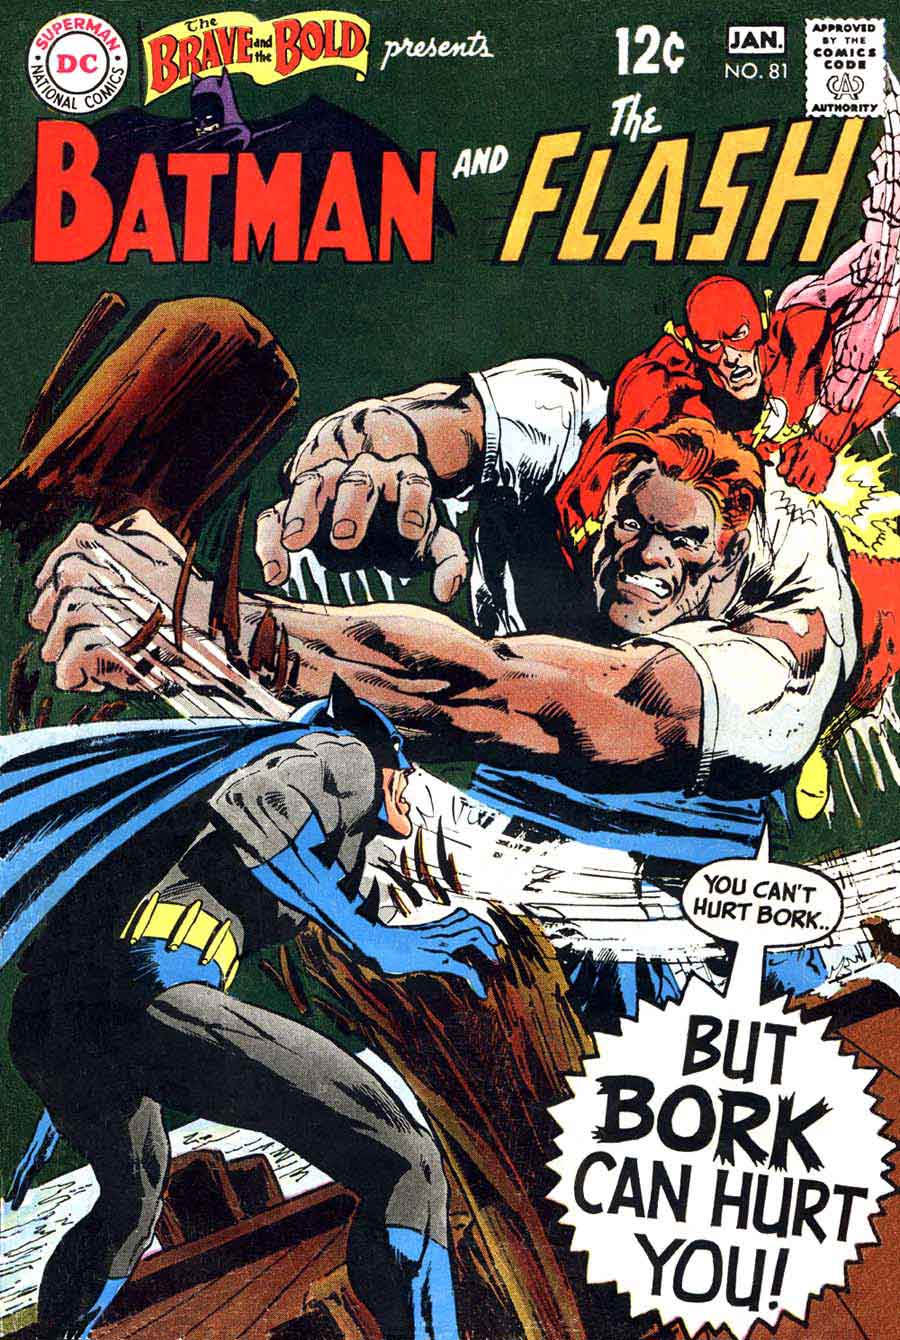 Brave and the Bold v1 #8 1dc comic book cover art by Neal Adams